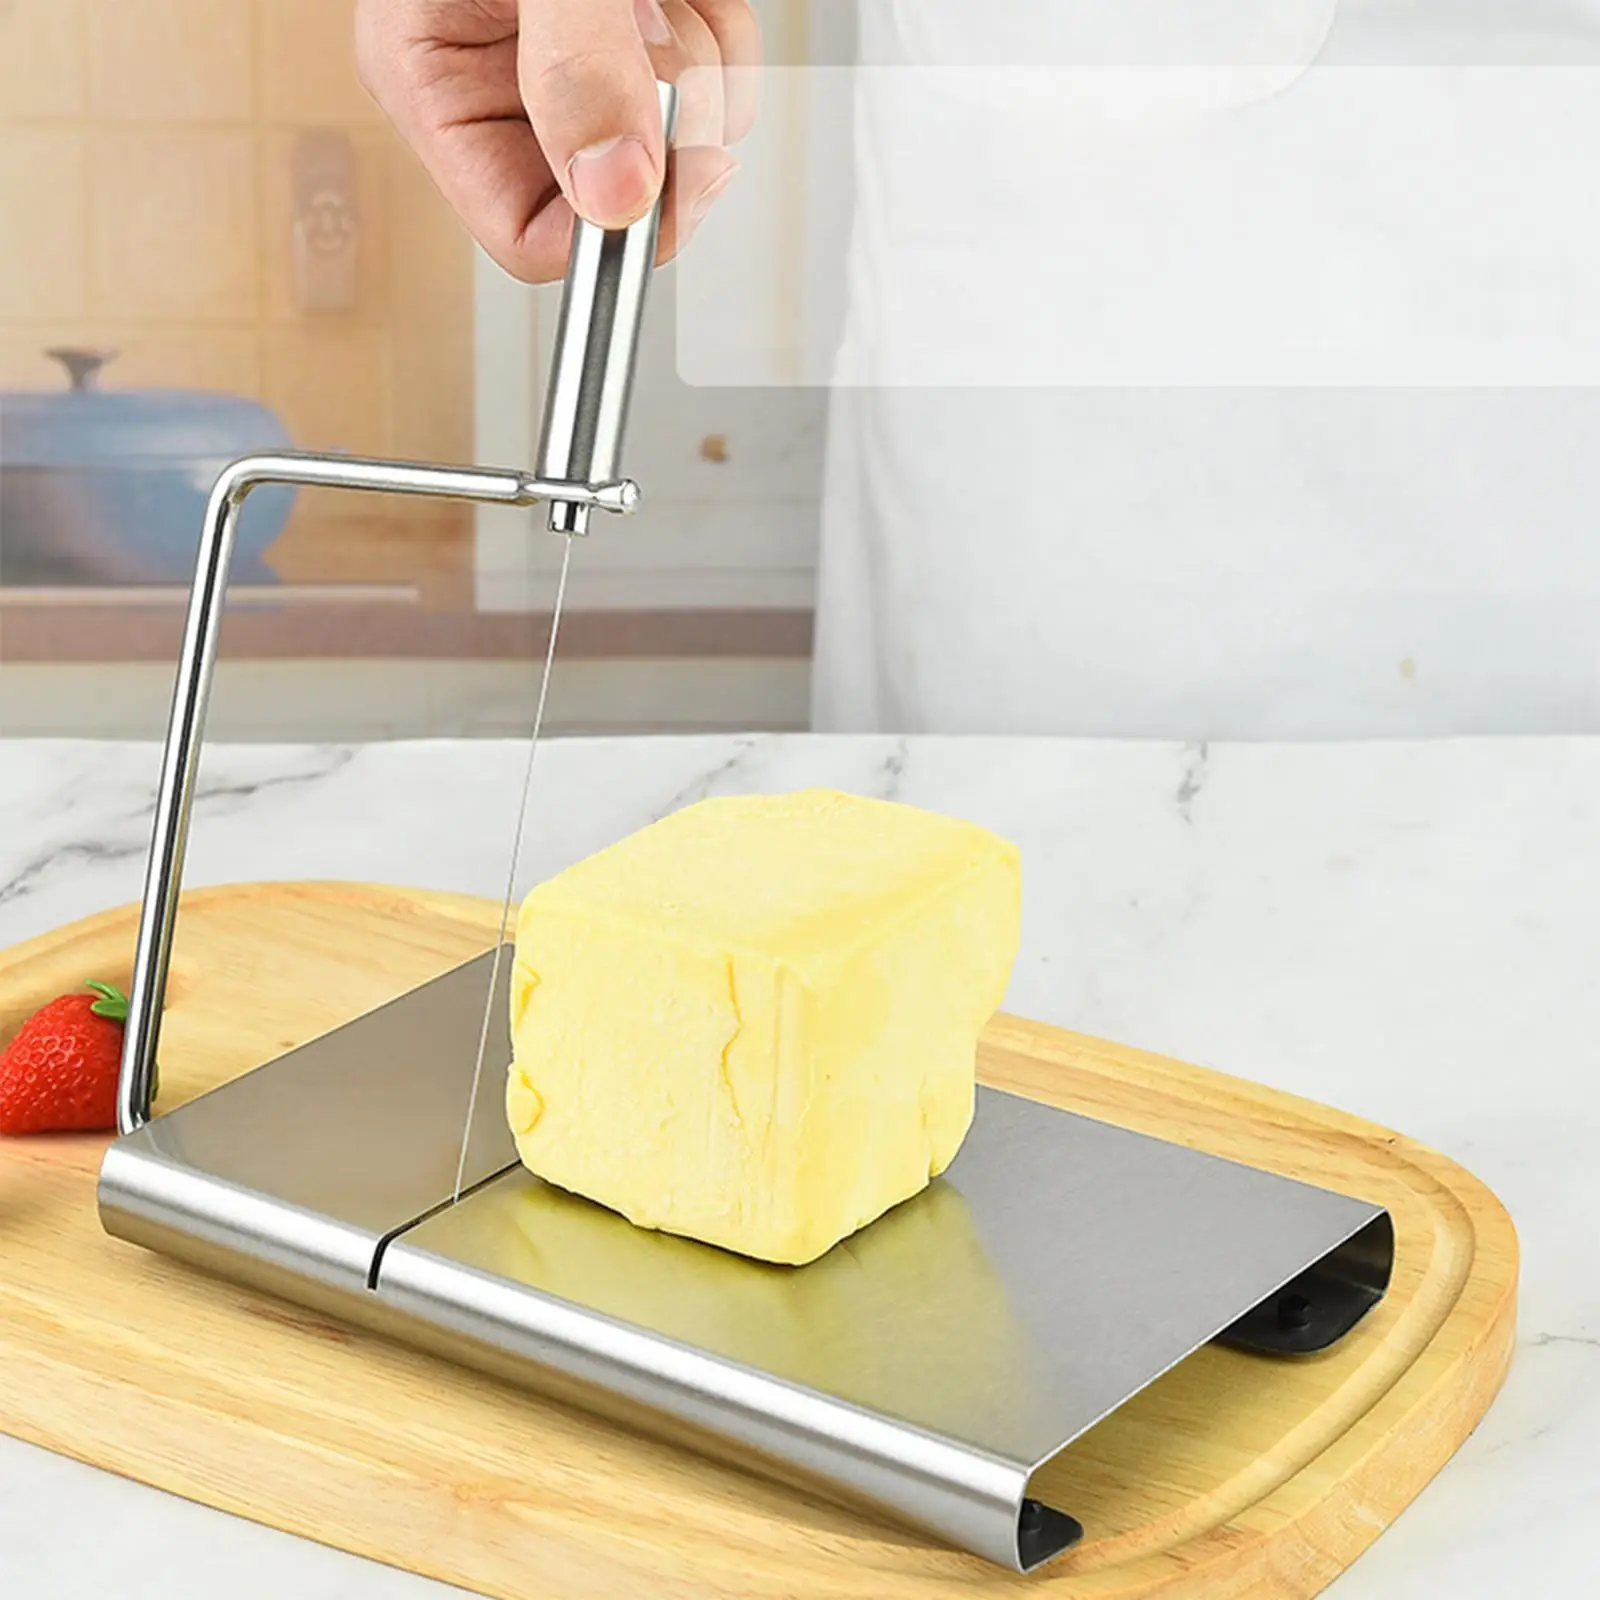 Cheese Slicer, Cheese Cutter Board, Cheese Block Slicer for Kitchen